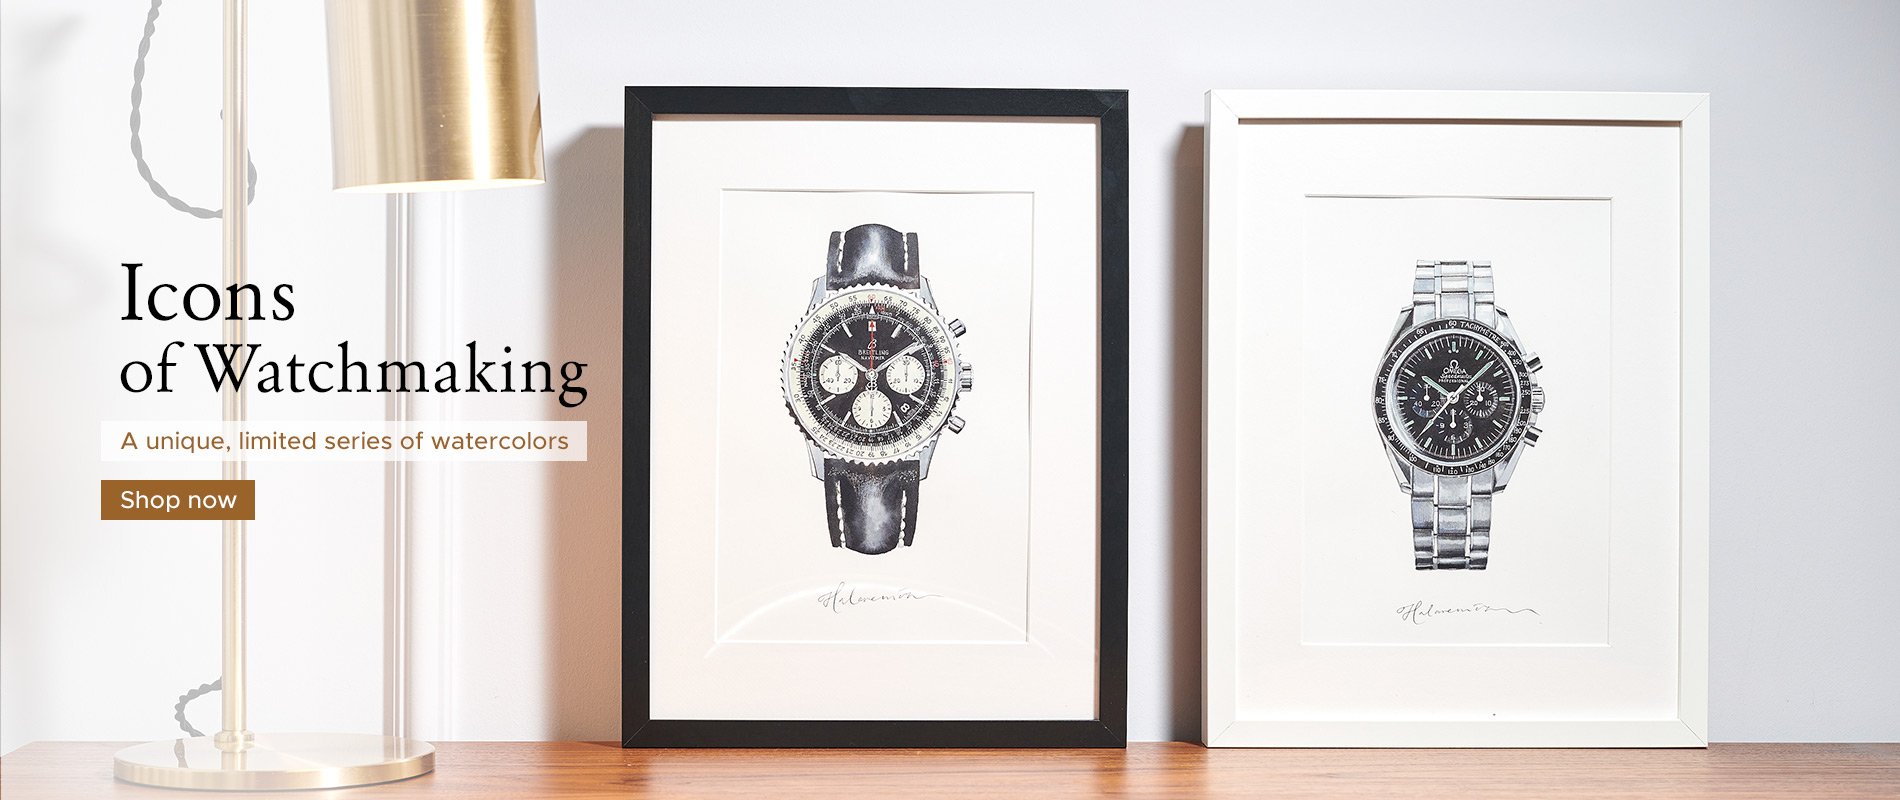 Icons of Watchmaking